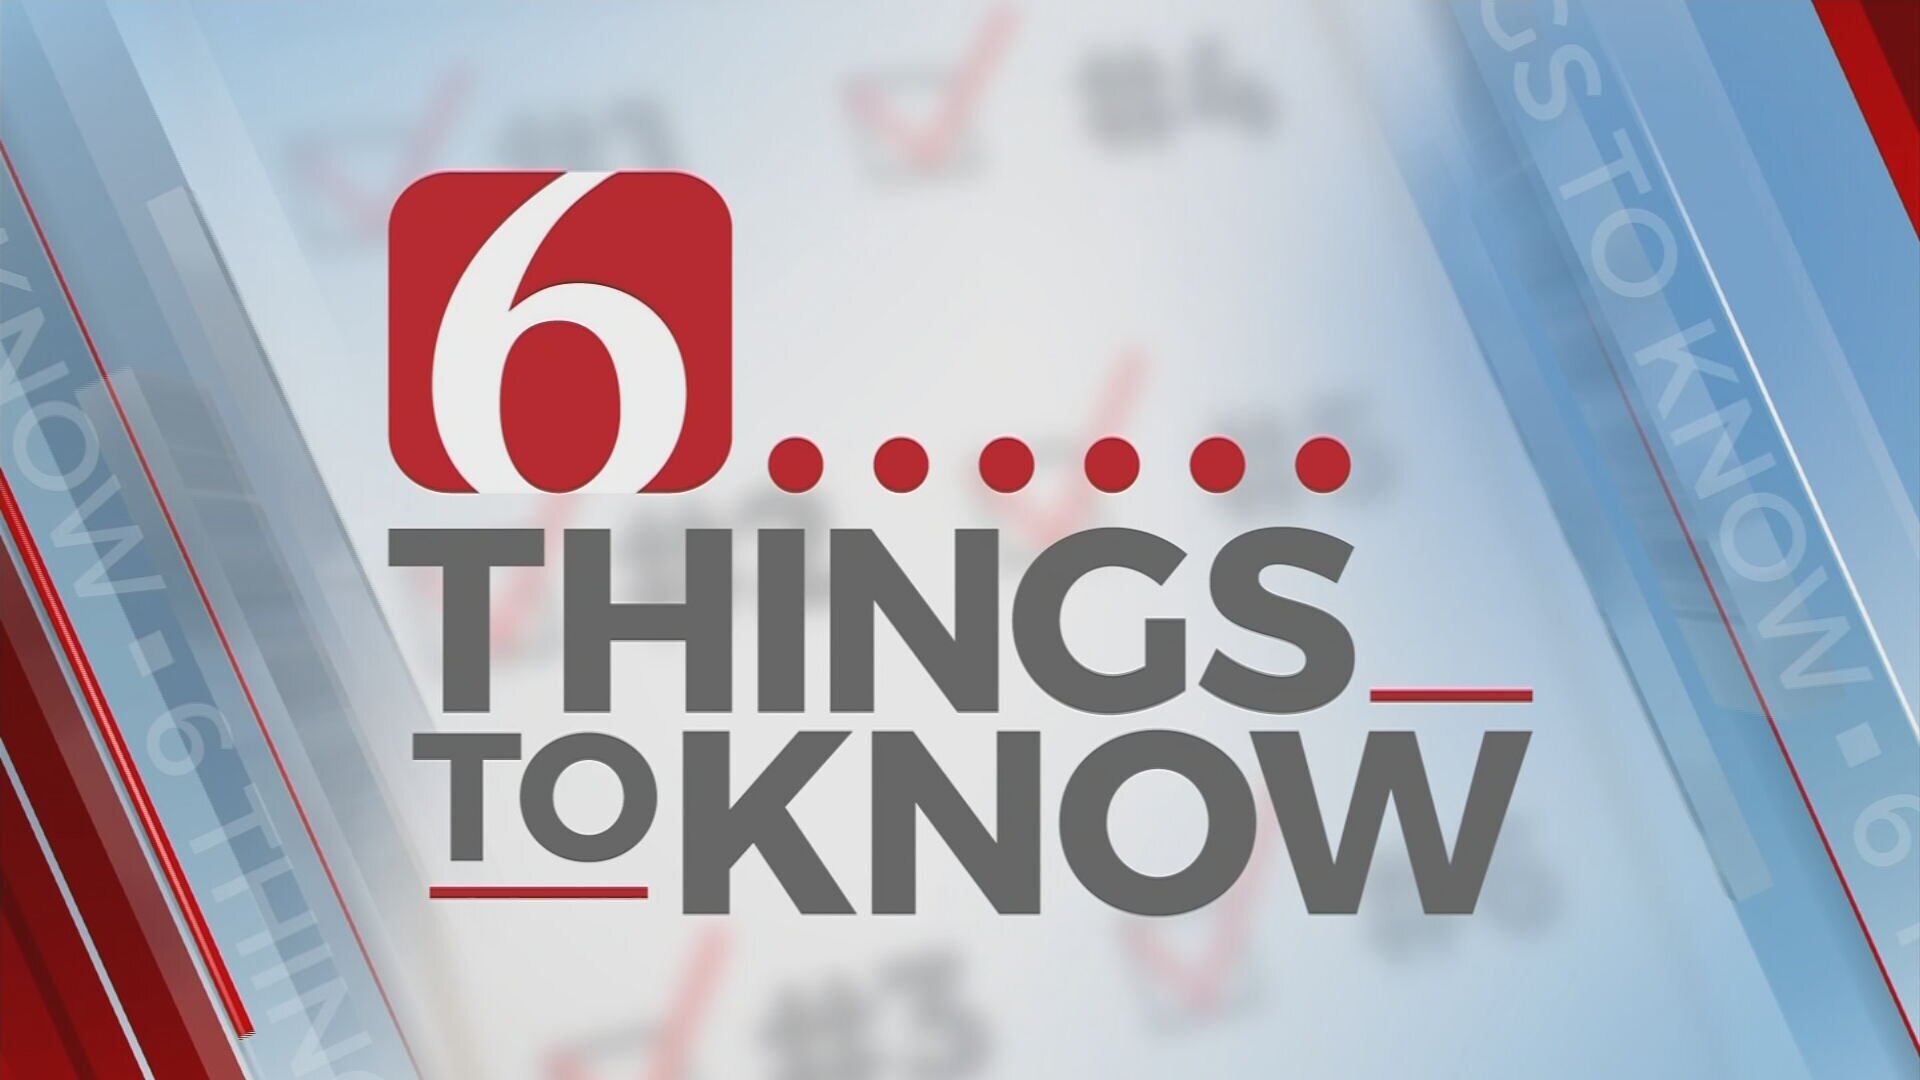 6 Things To Know (Jan 6): Washington, Tulsans Prepare For Election Certification 